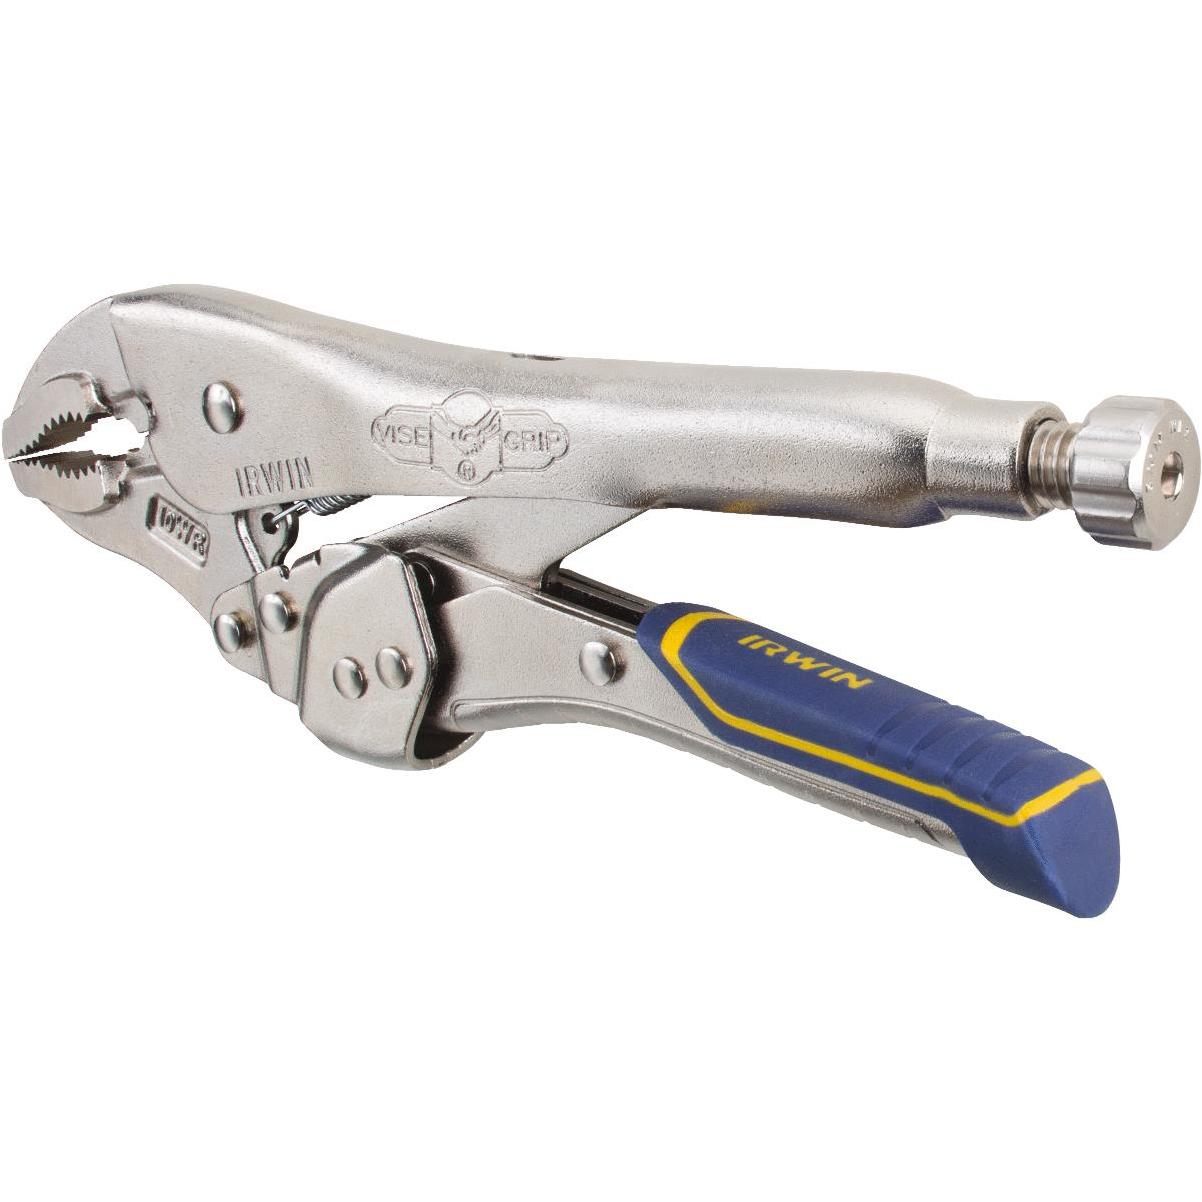 Irwin Vise-Grip The Original 7 In. Curved Jaw Locking Pliers with